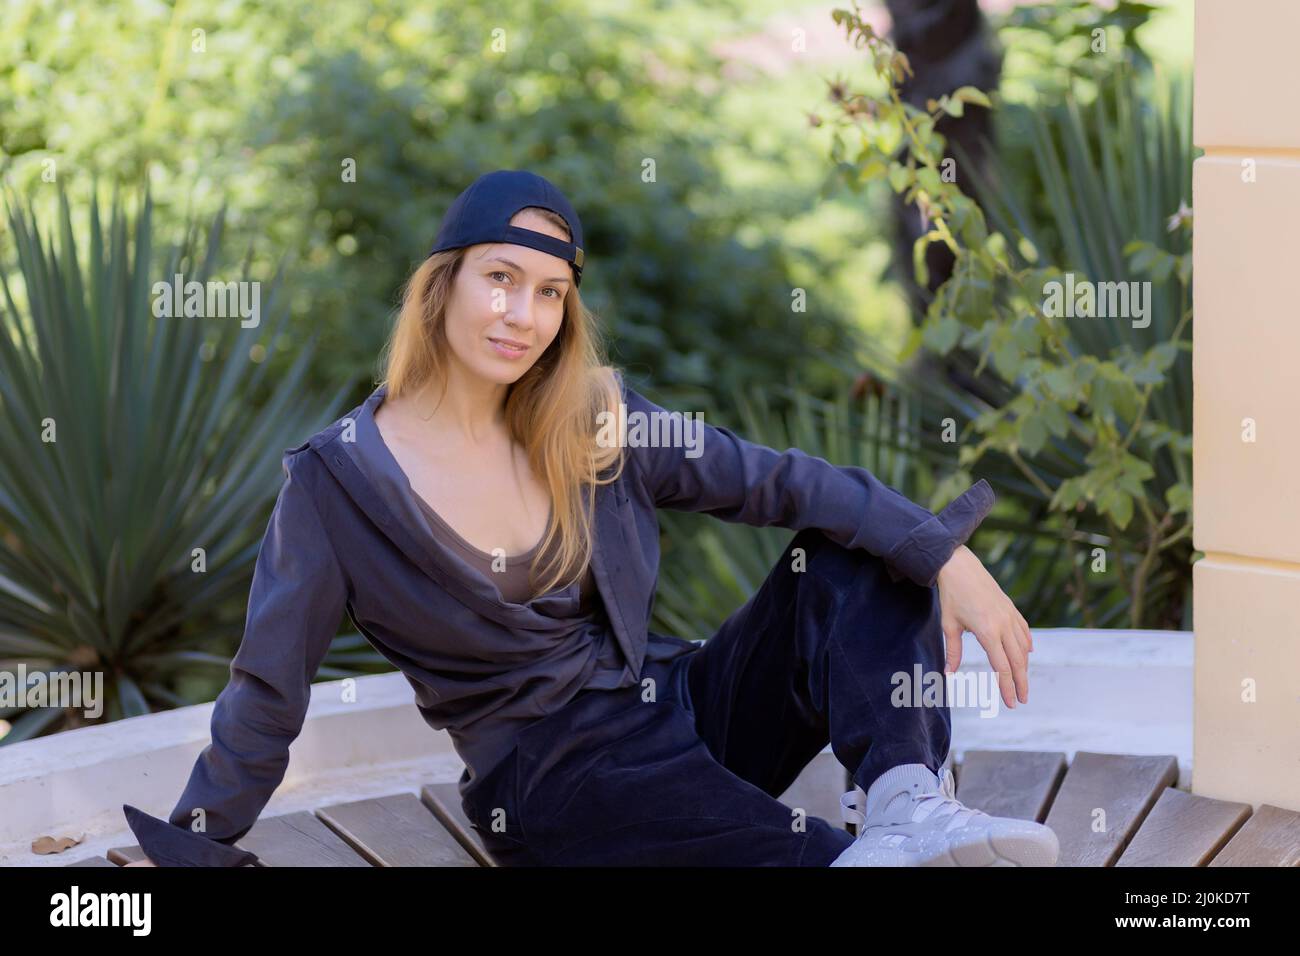 Smiling blonde sports girl sitting on a wooden seat in the park against a background of green southern plants Stock Photo